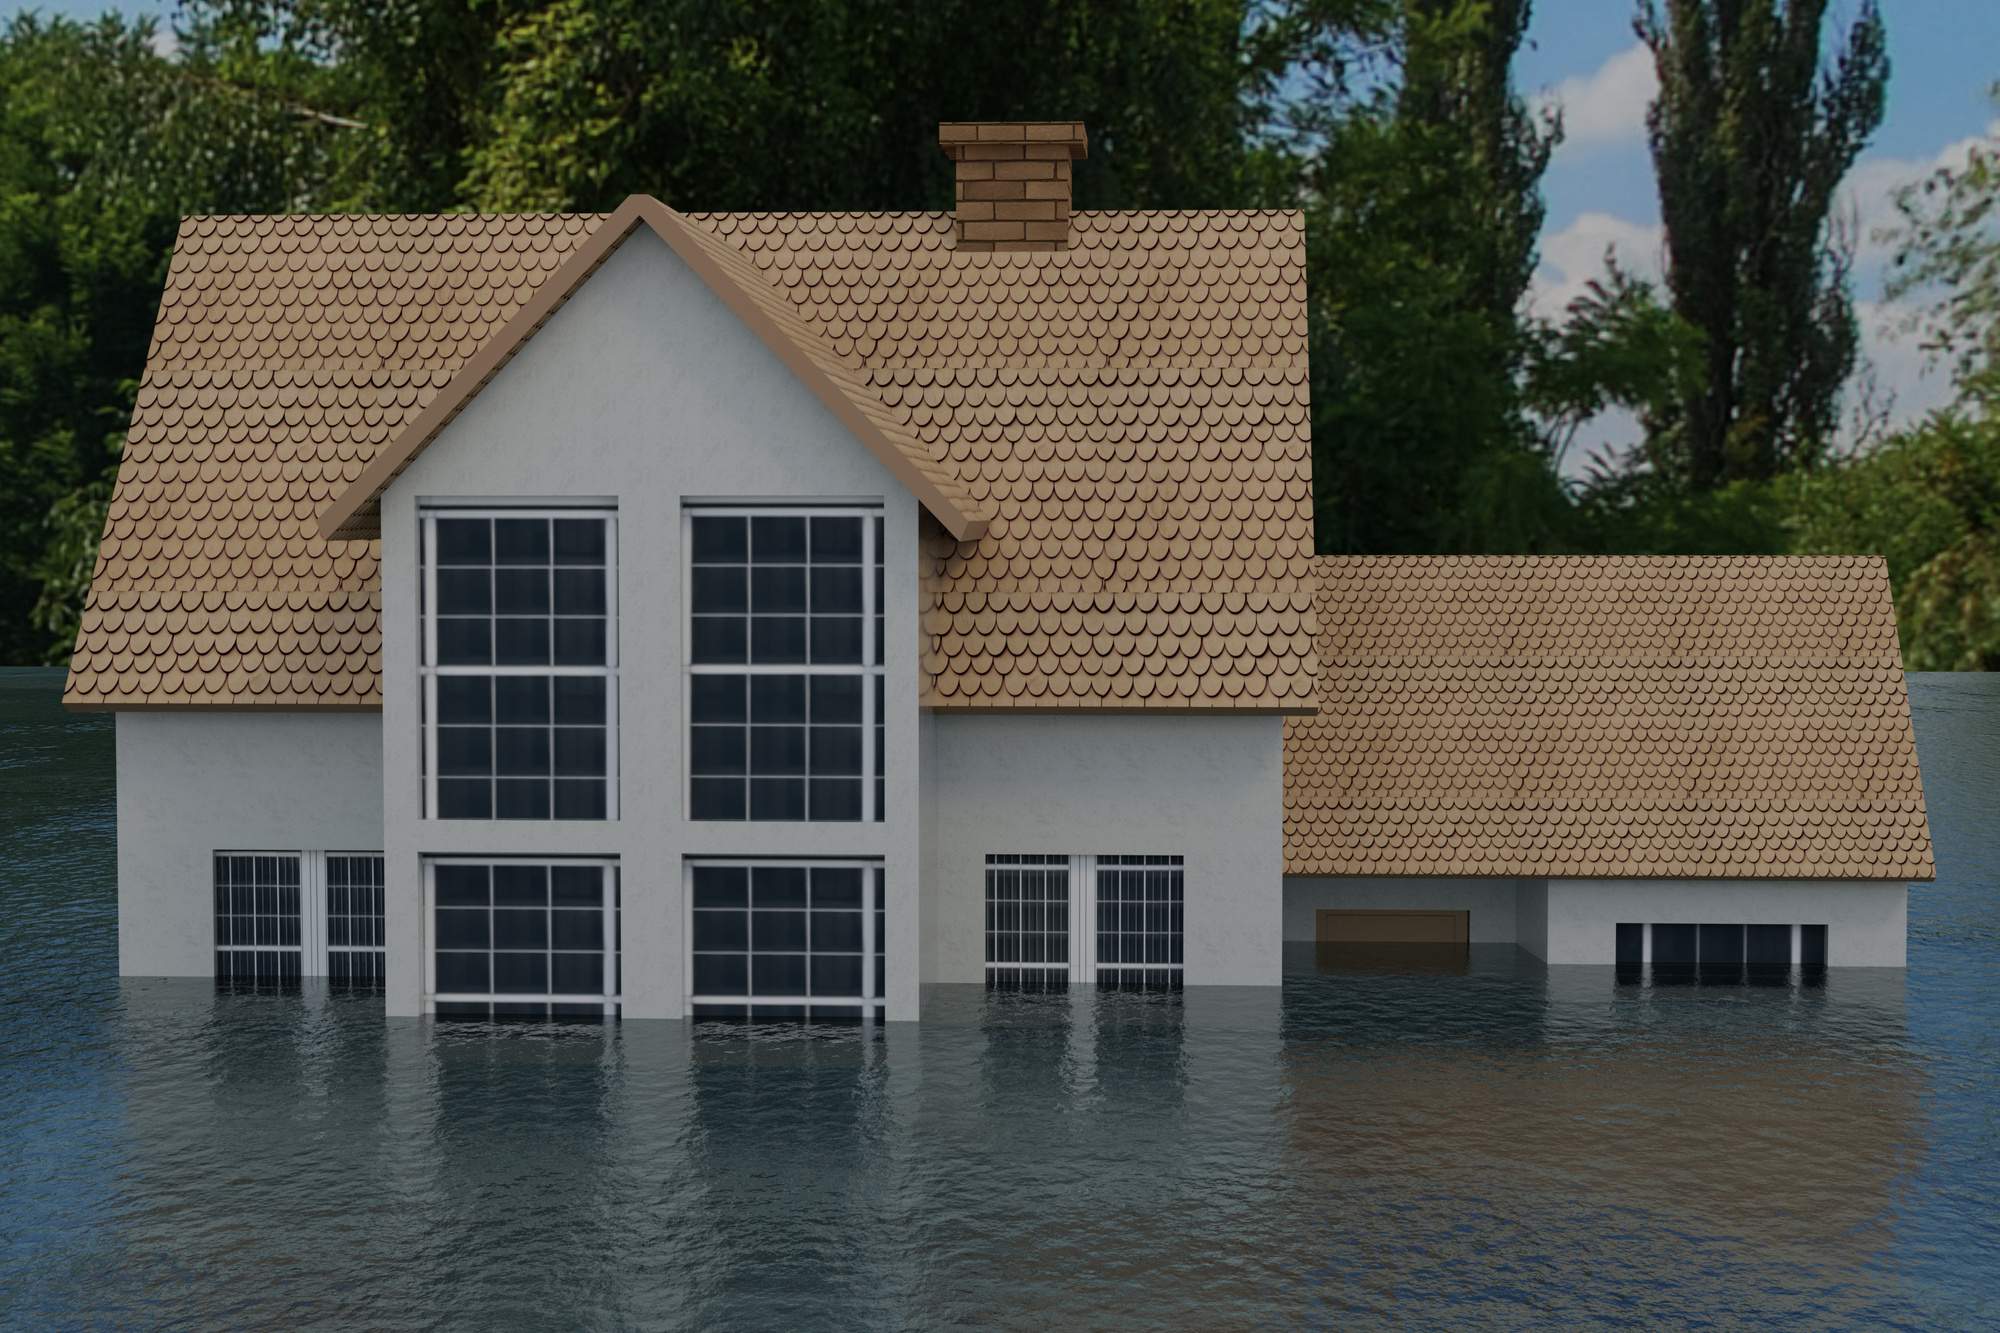 The Ultimate Guide on What to Do if Your House Floods